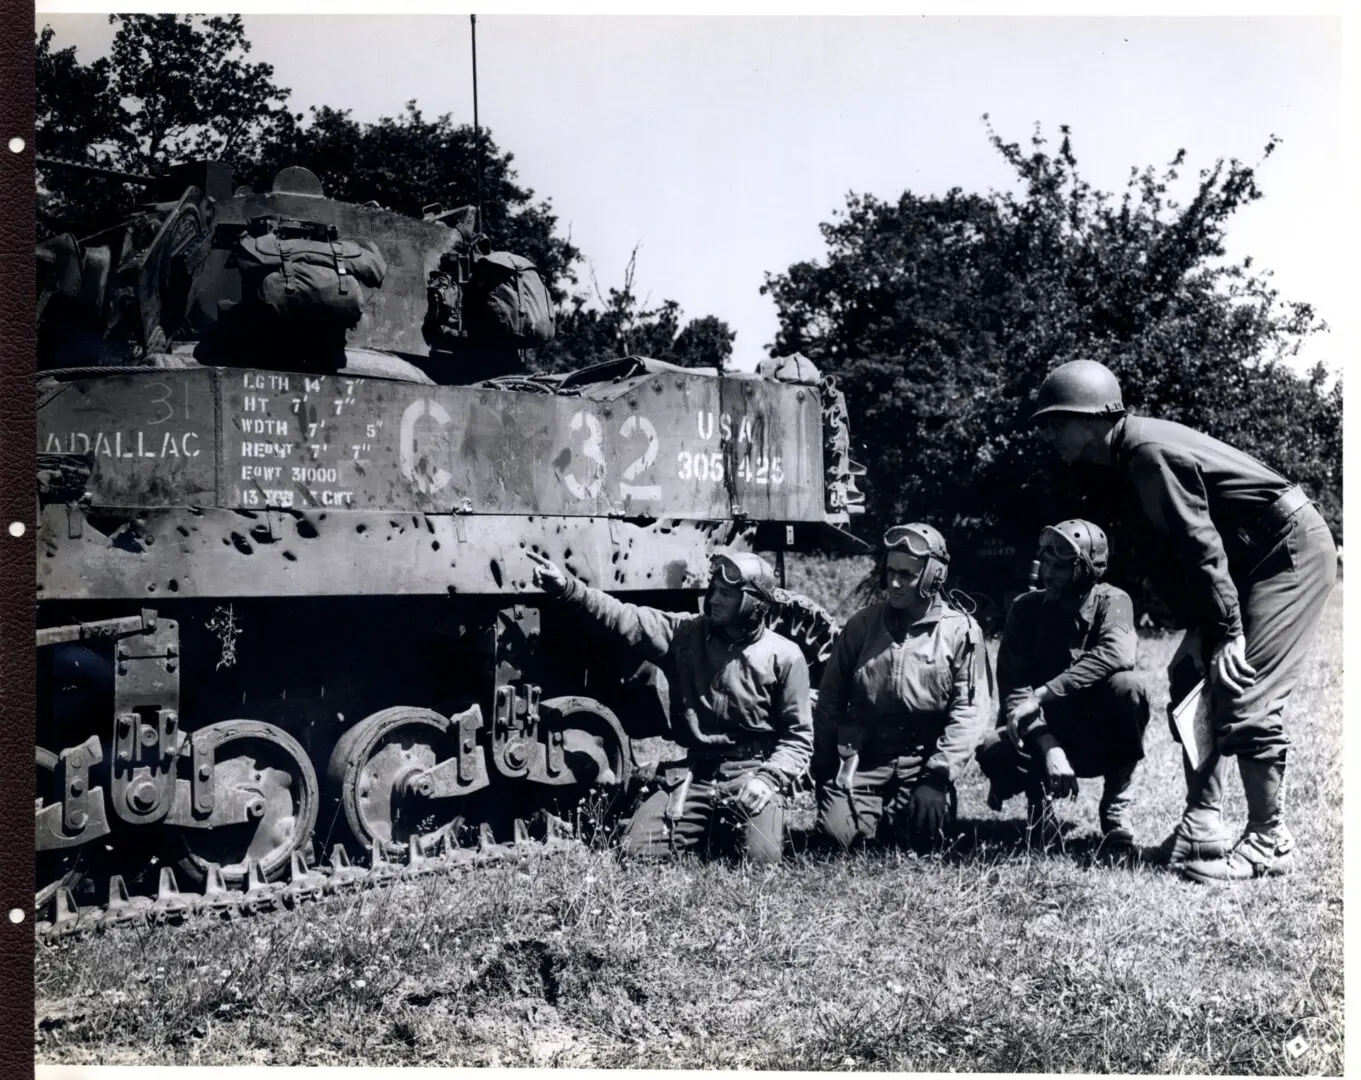 Soldiers examine the holes caused by shells on their tank